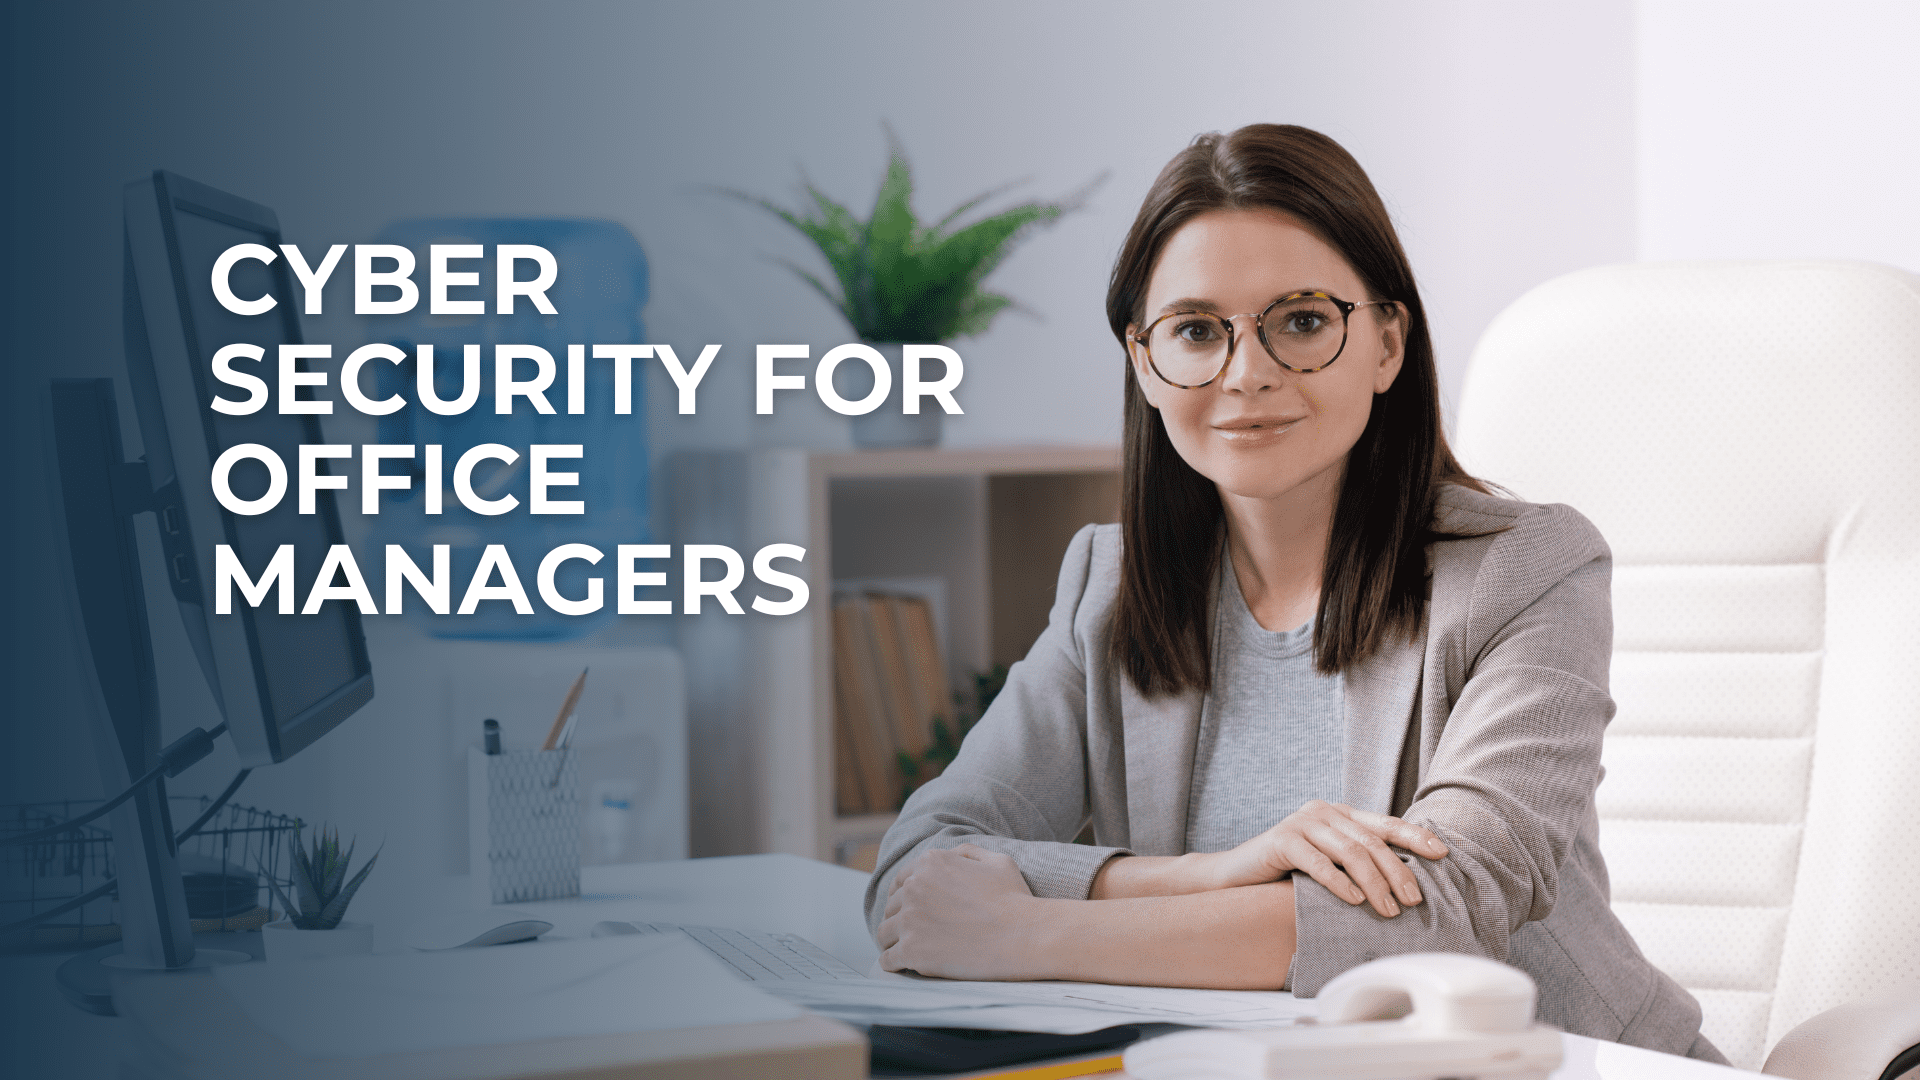 beca-cyber-security-office-managers